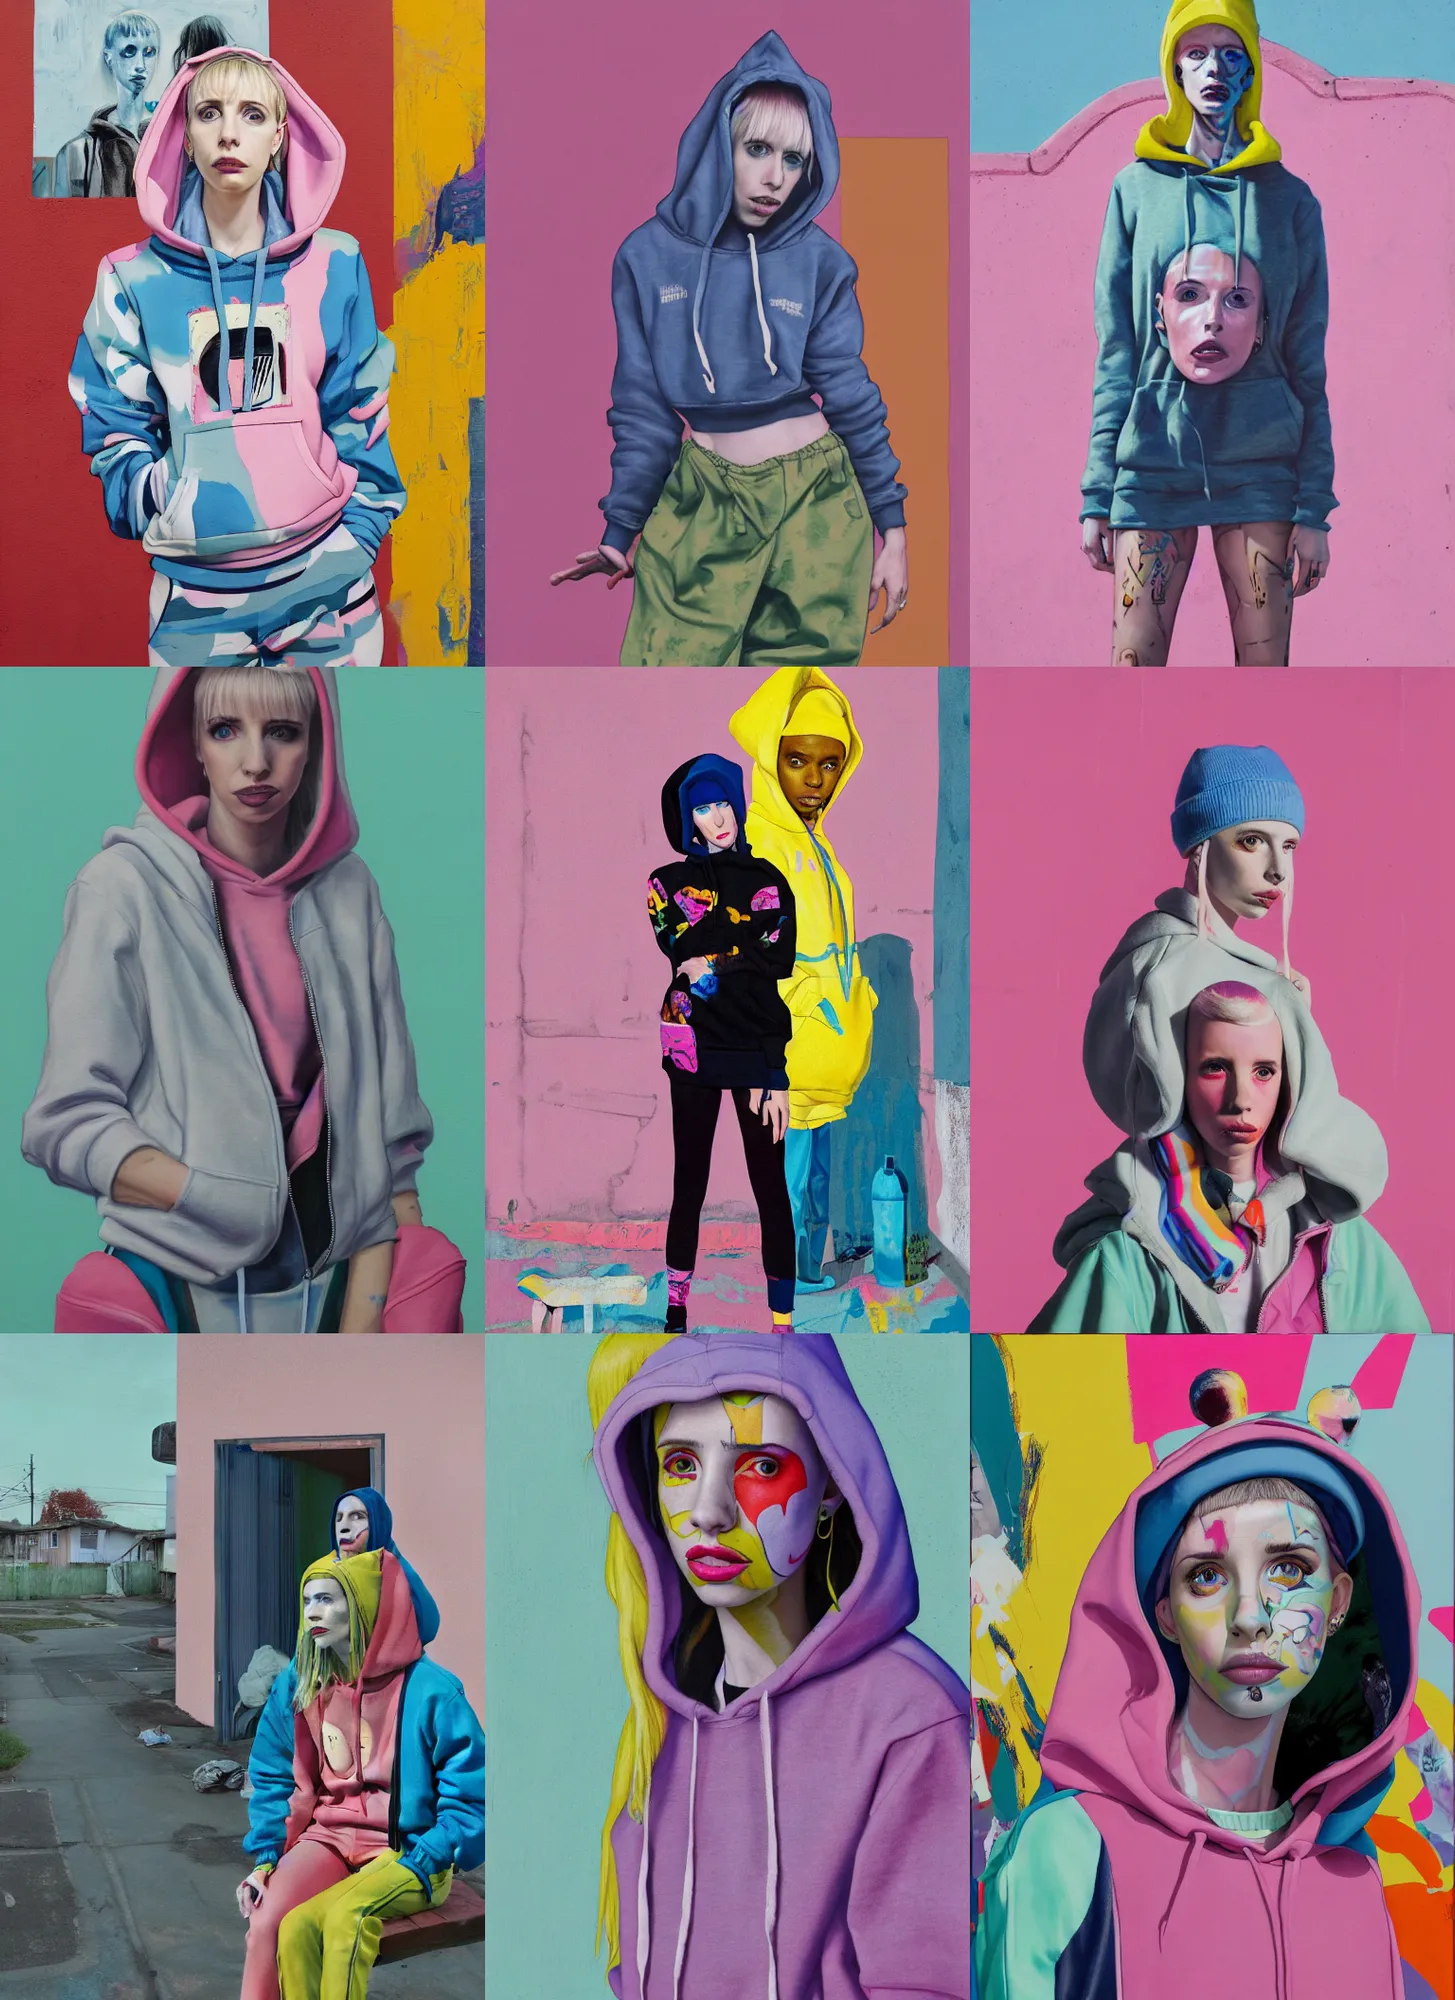 Prompt: still from music video of emma roberts from die antwoord standing in a township street, wearing a hoodie, street clothes, full figure portrait painting by martine johanna, njideka akunyili crosby, pastel color palette, 3 5 mm lens